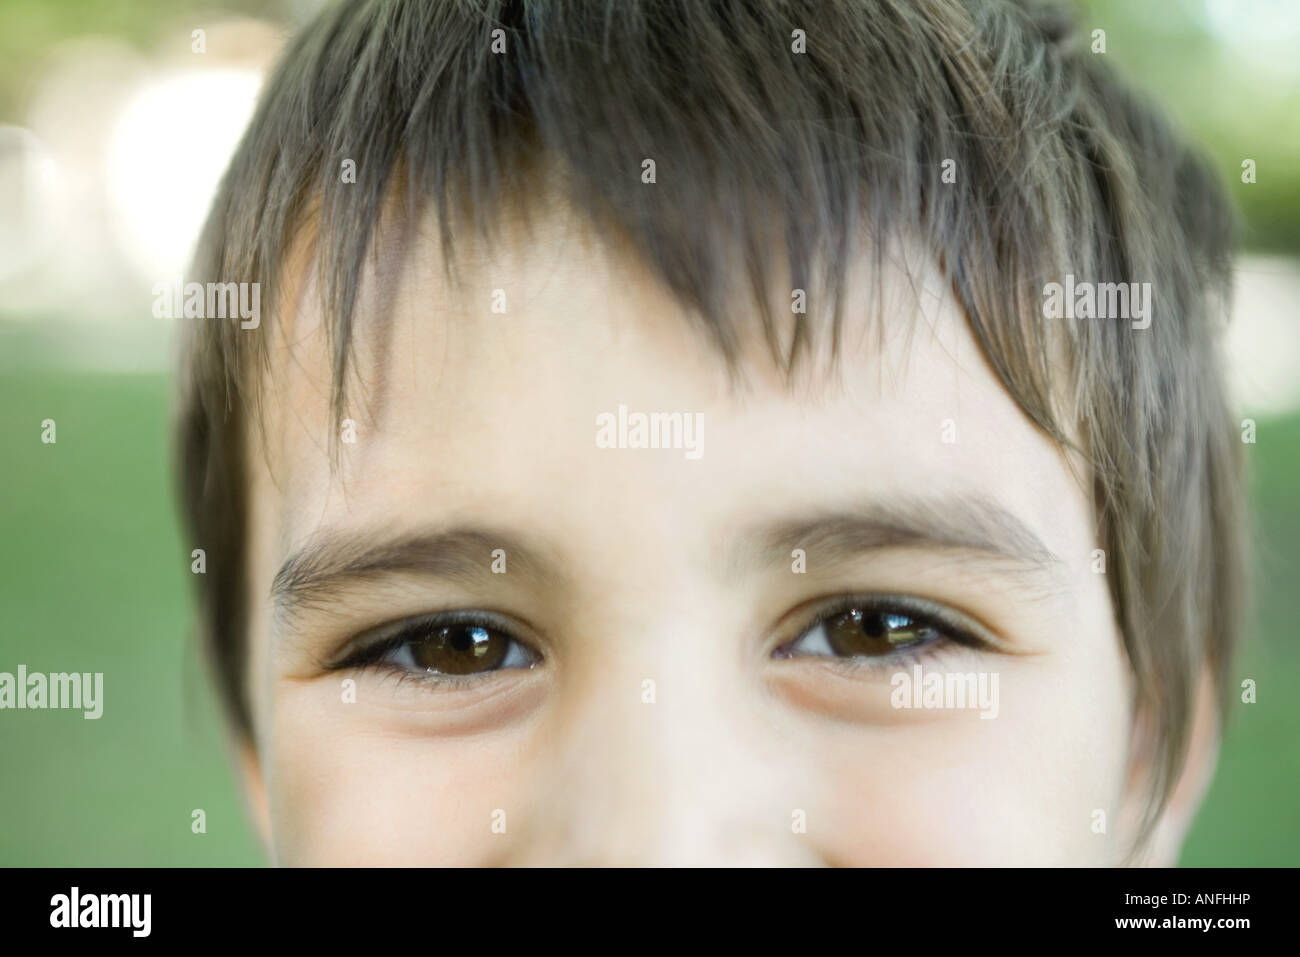 Little boy smiling at camera, cropped view of face, close-up Stock Photo